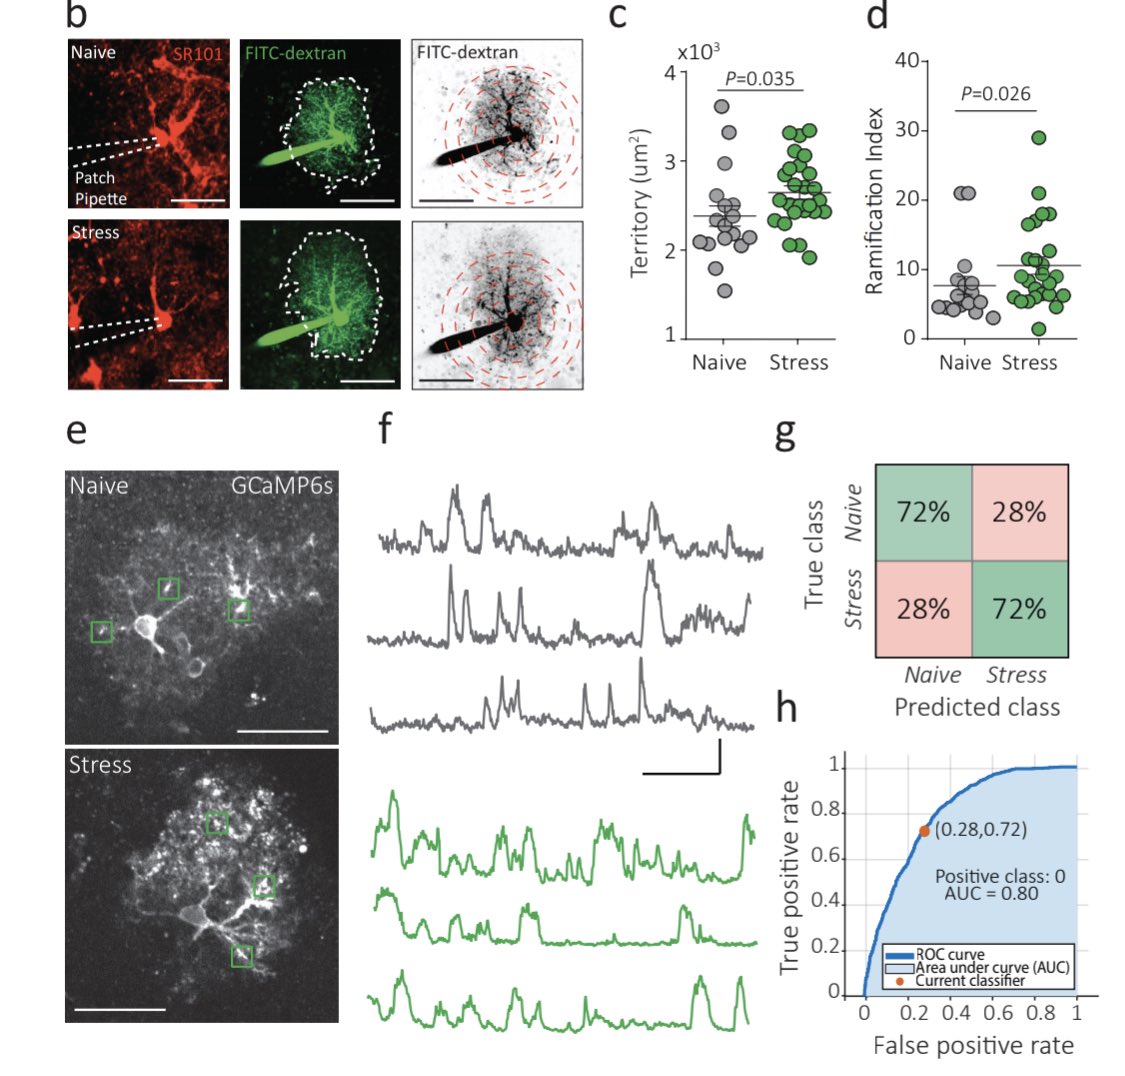 In our paper we show that acute stress changes astrocyte gene expression, morphology, calcium signalling, and expression of gap junction channel proteins.